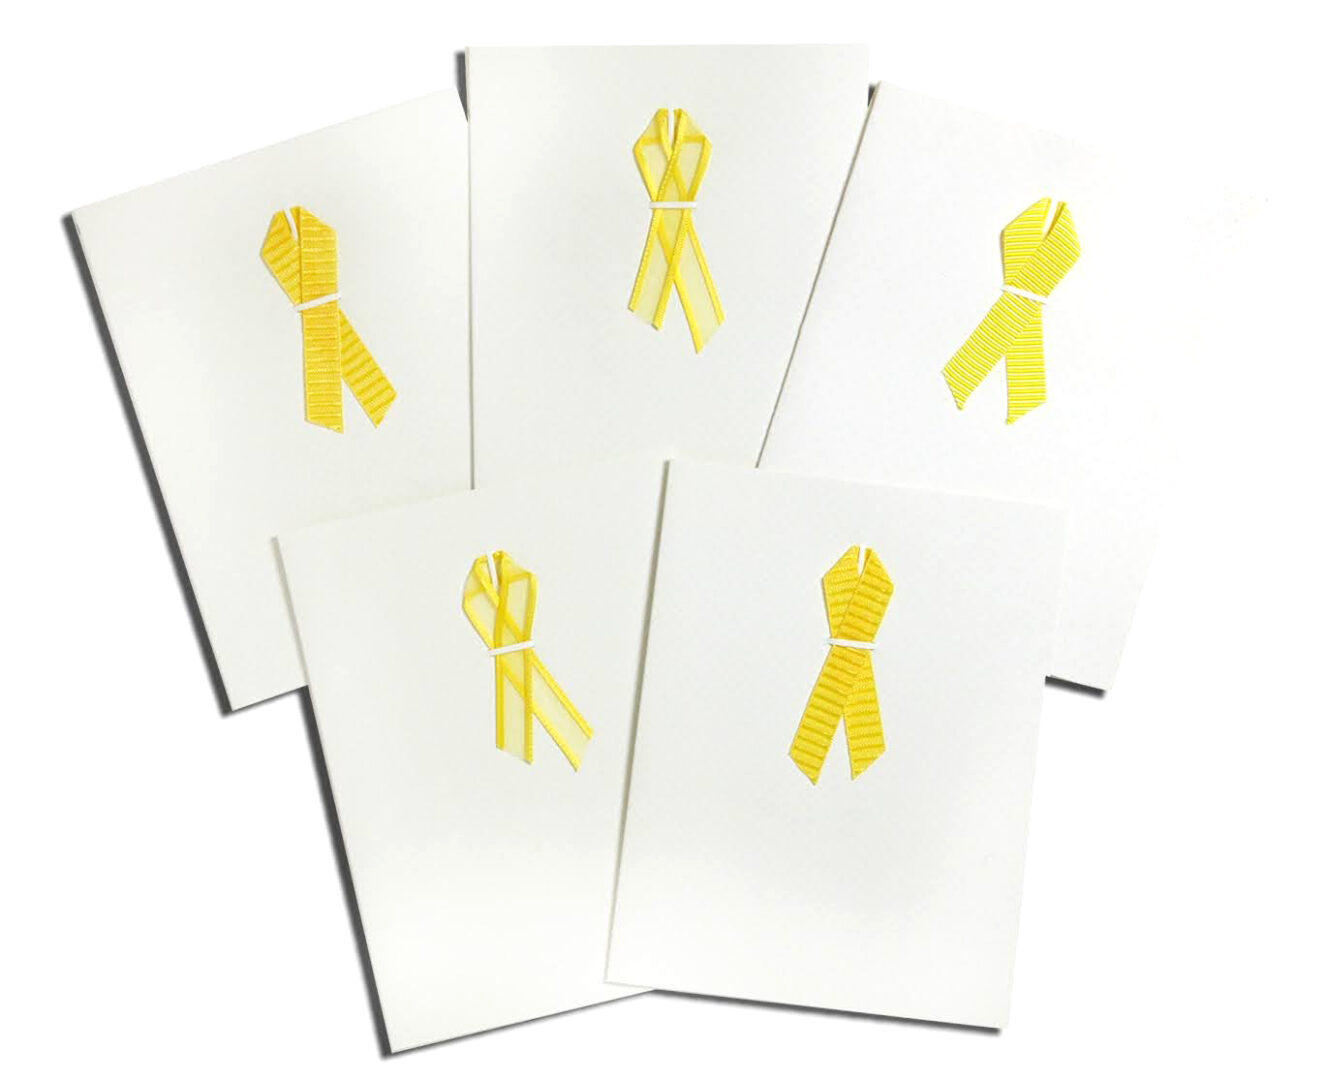 A set of six cards with yellow ribbon designs.